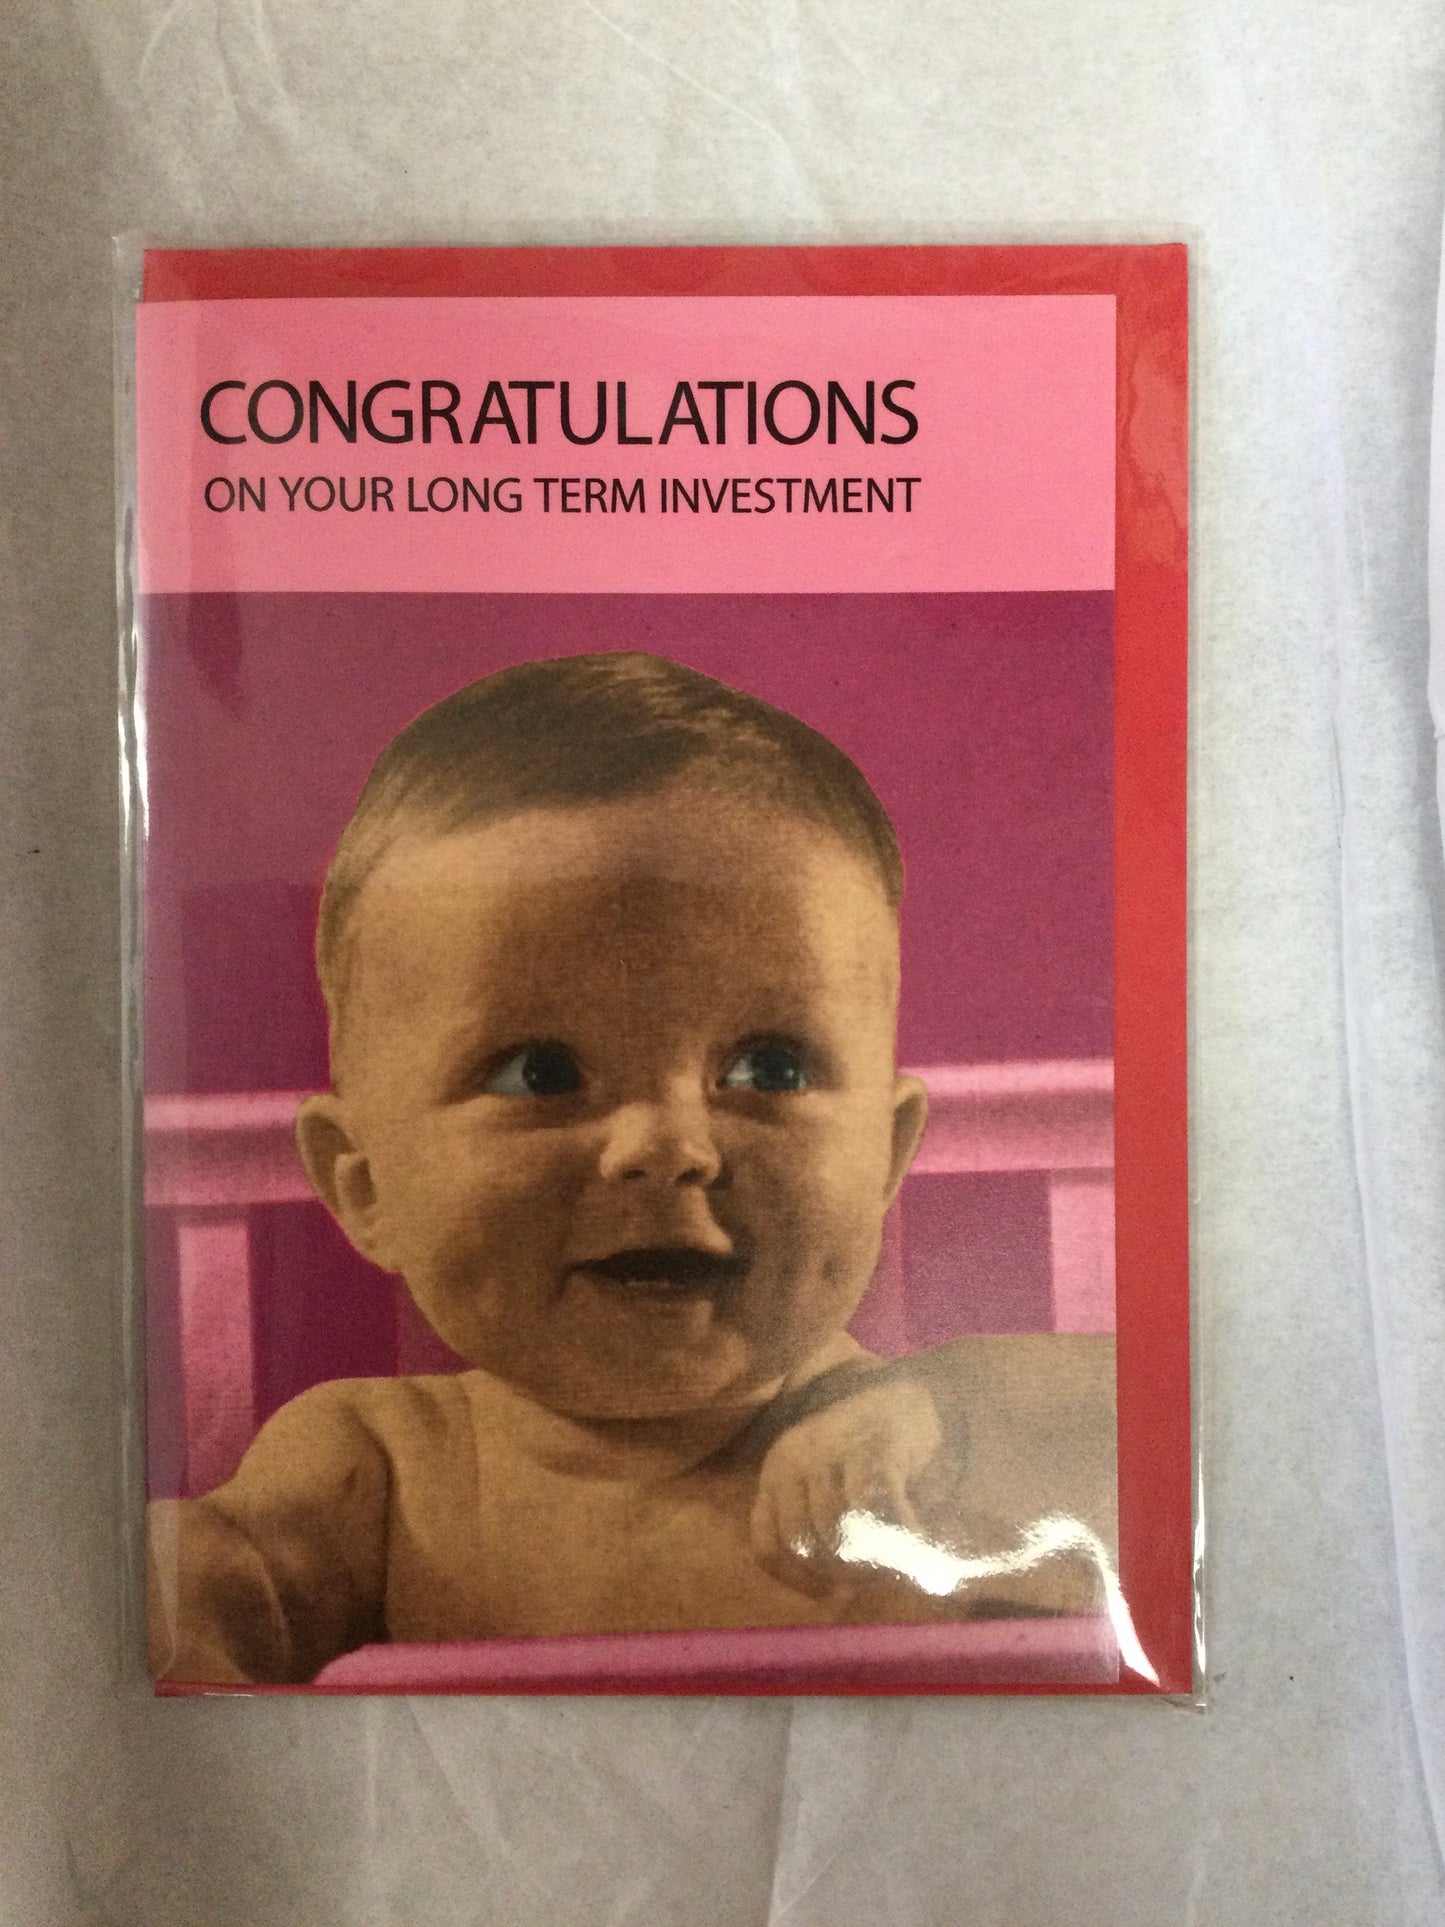 Card, Congratulations on Long Term Investment, Pink